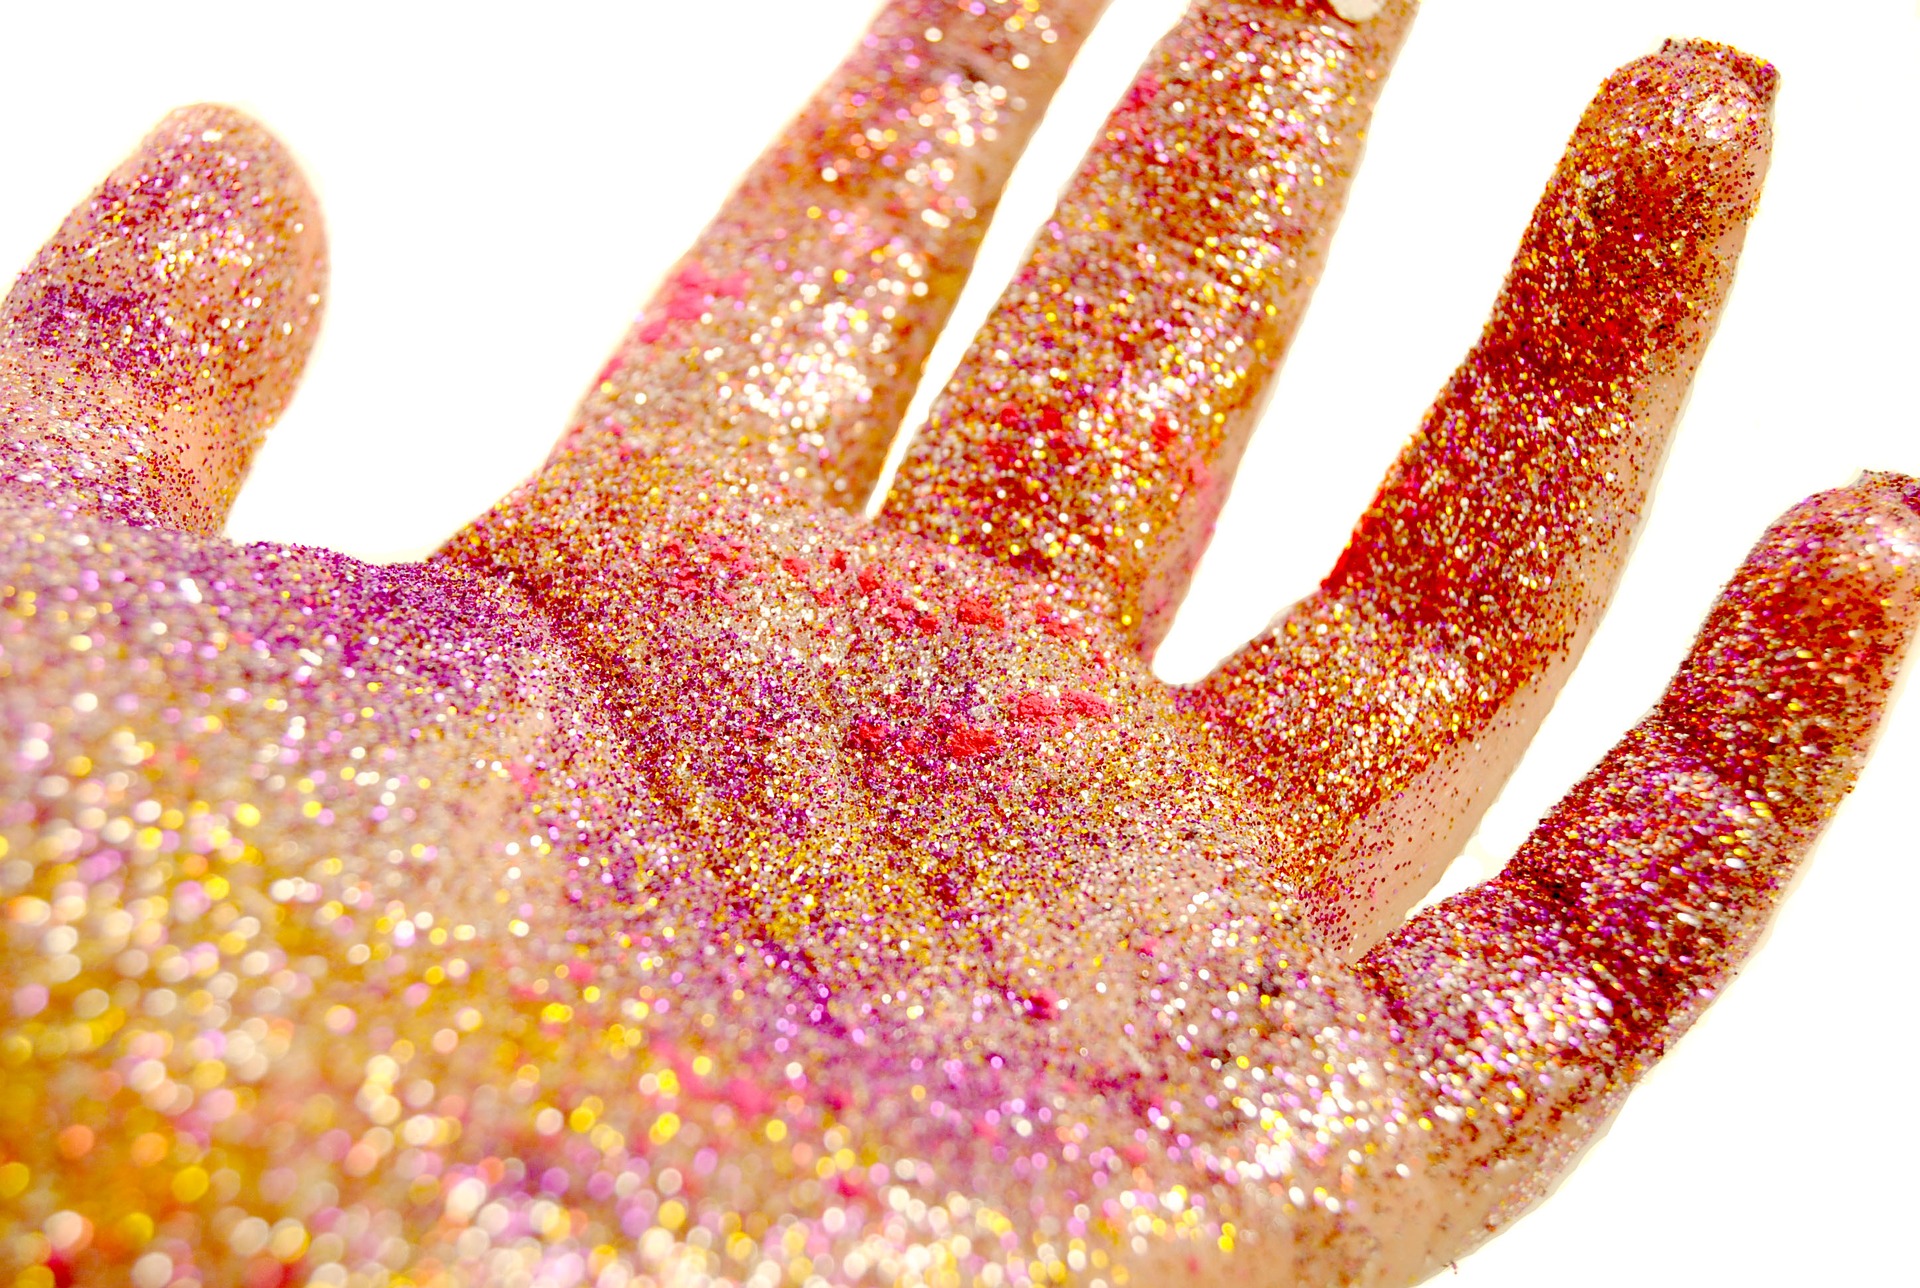 A hand covered in glitter